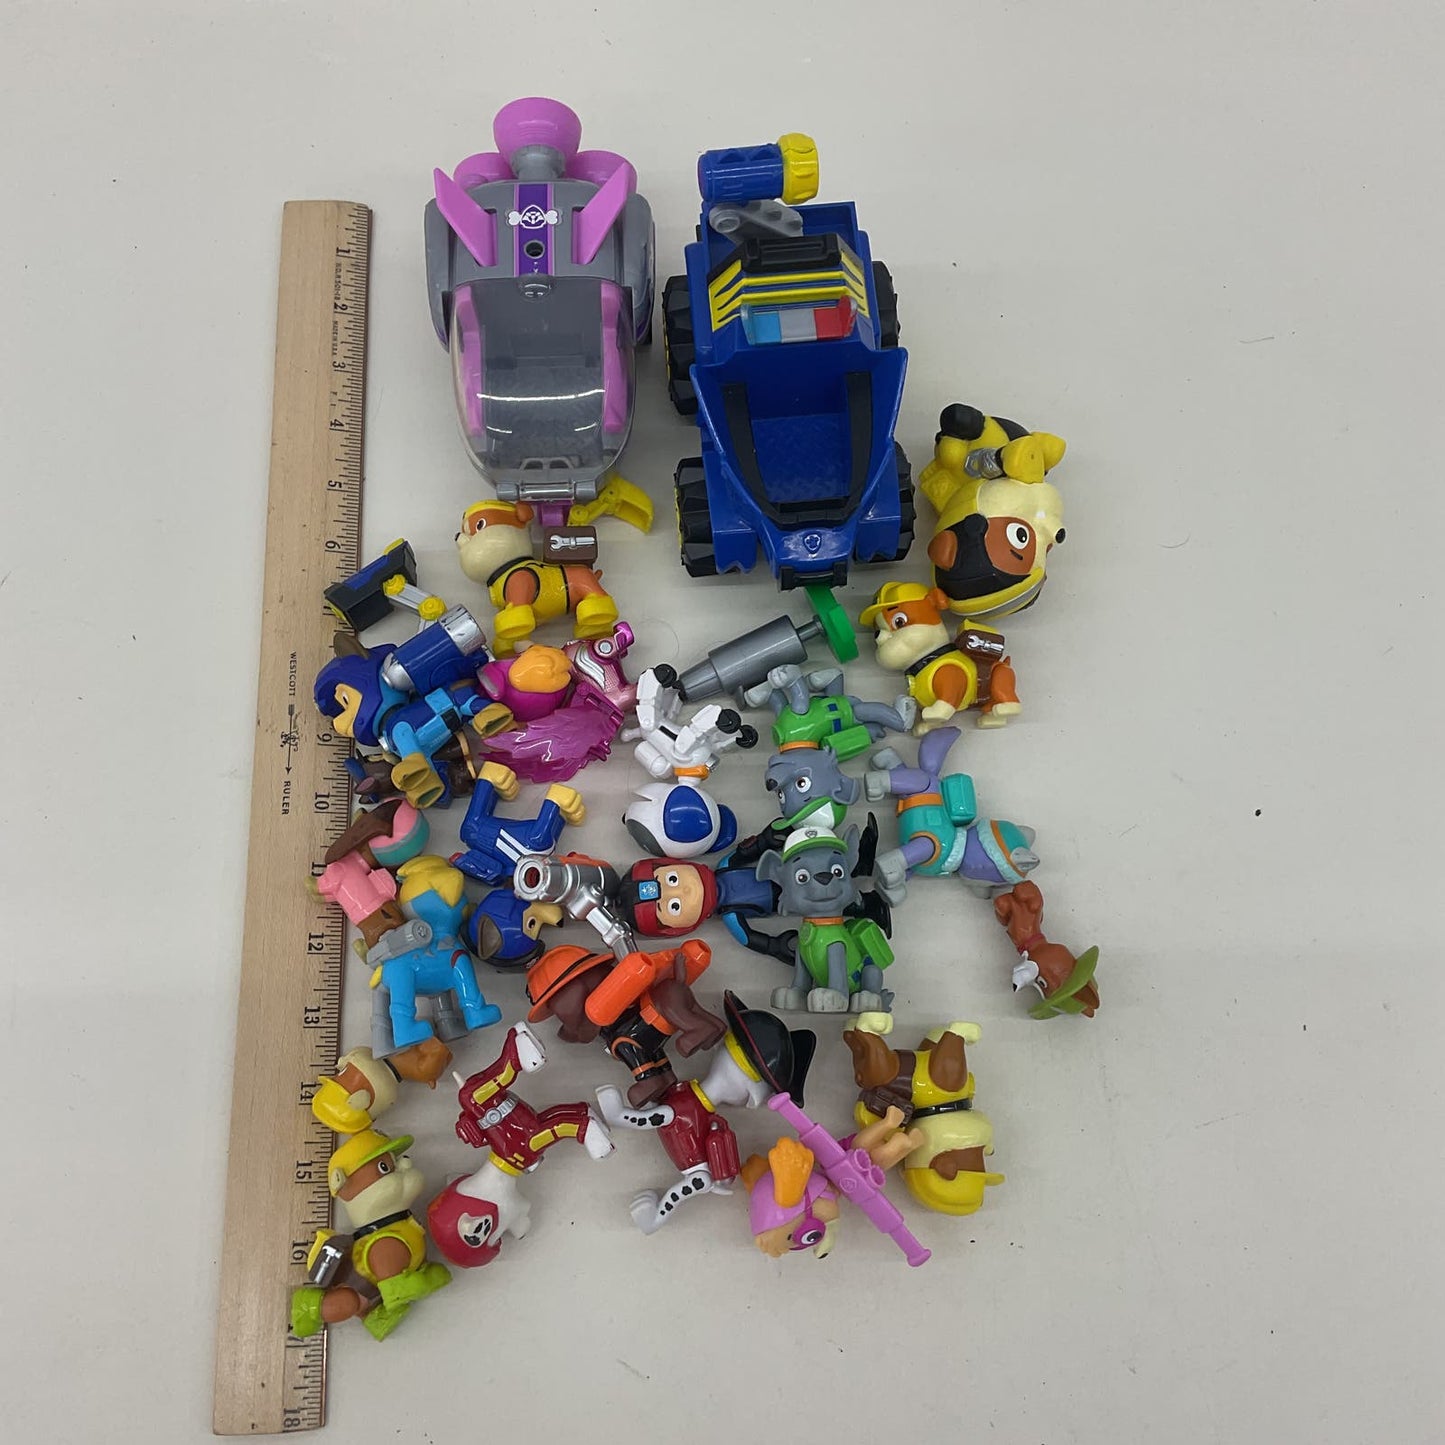 Mixed Nickelodeon LOT Paw Patrol Dog Character Toy Figures Vehicles Cake Toppers - Warehouse Toys